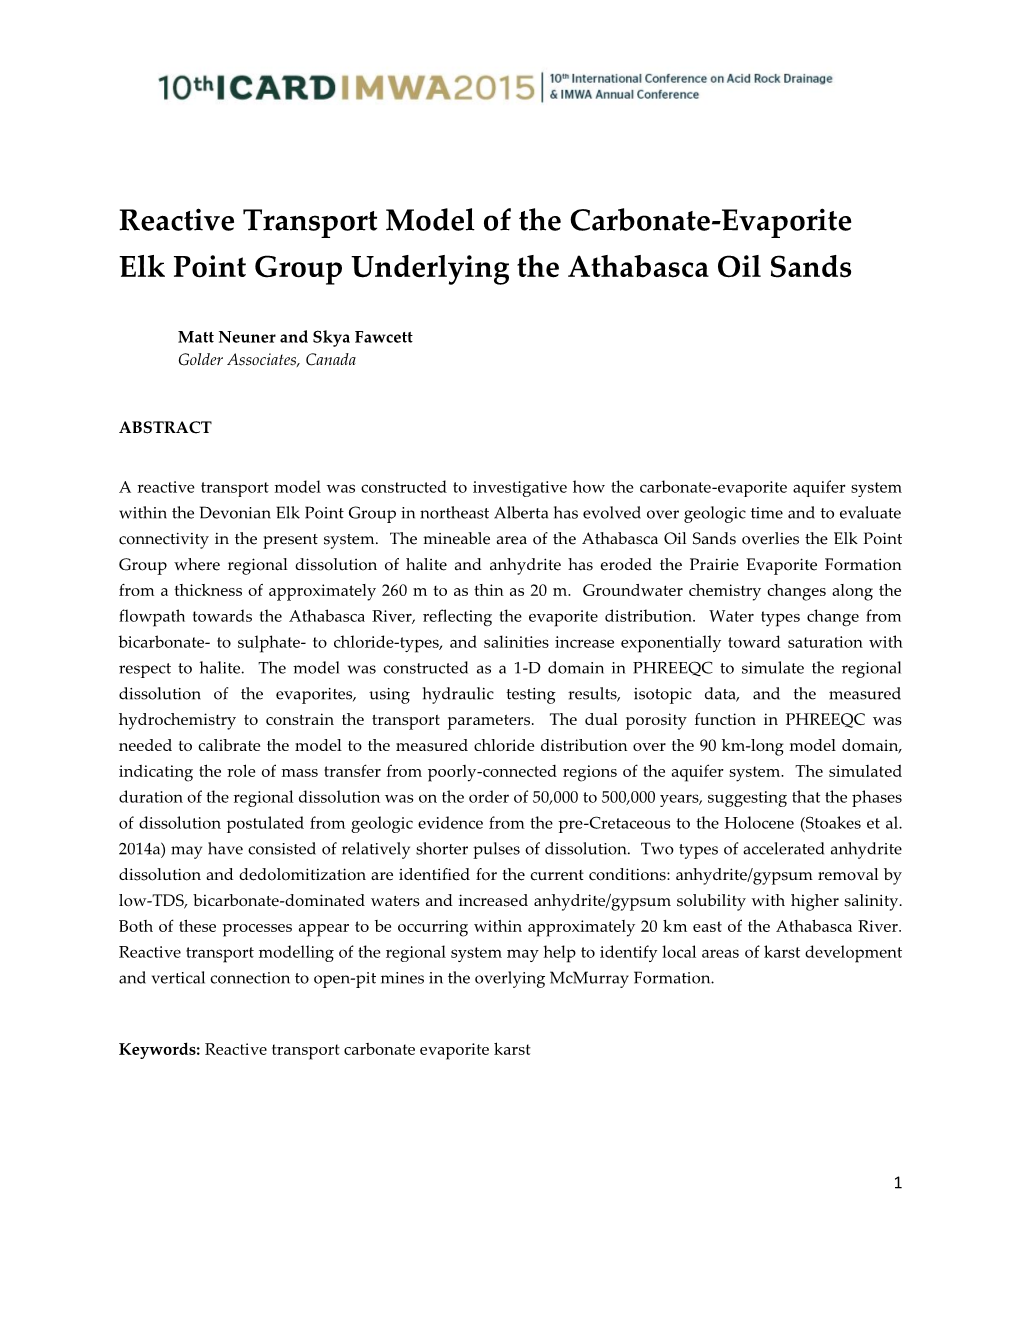 Reactive Transport Model of the Carbonate-Evaporite Elk Point Group Underlying the Athabasca Oil Sands